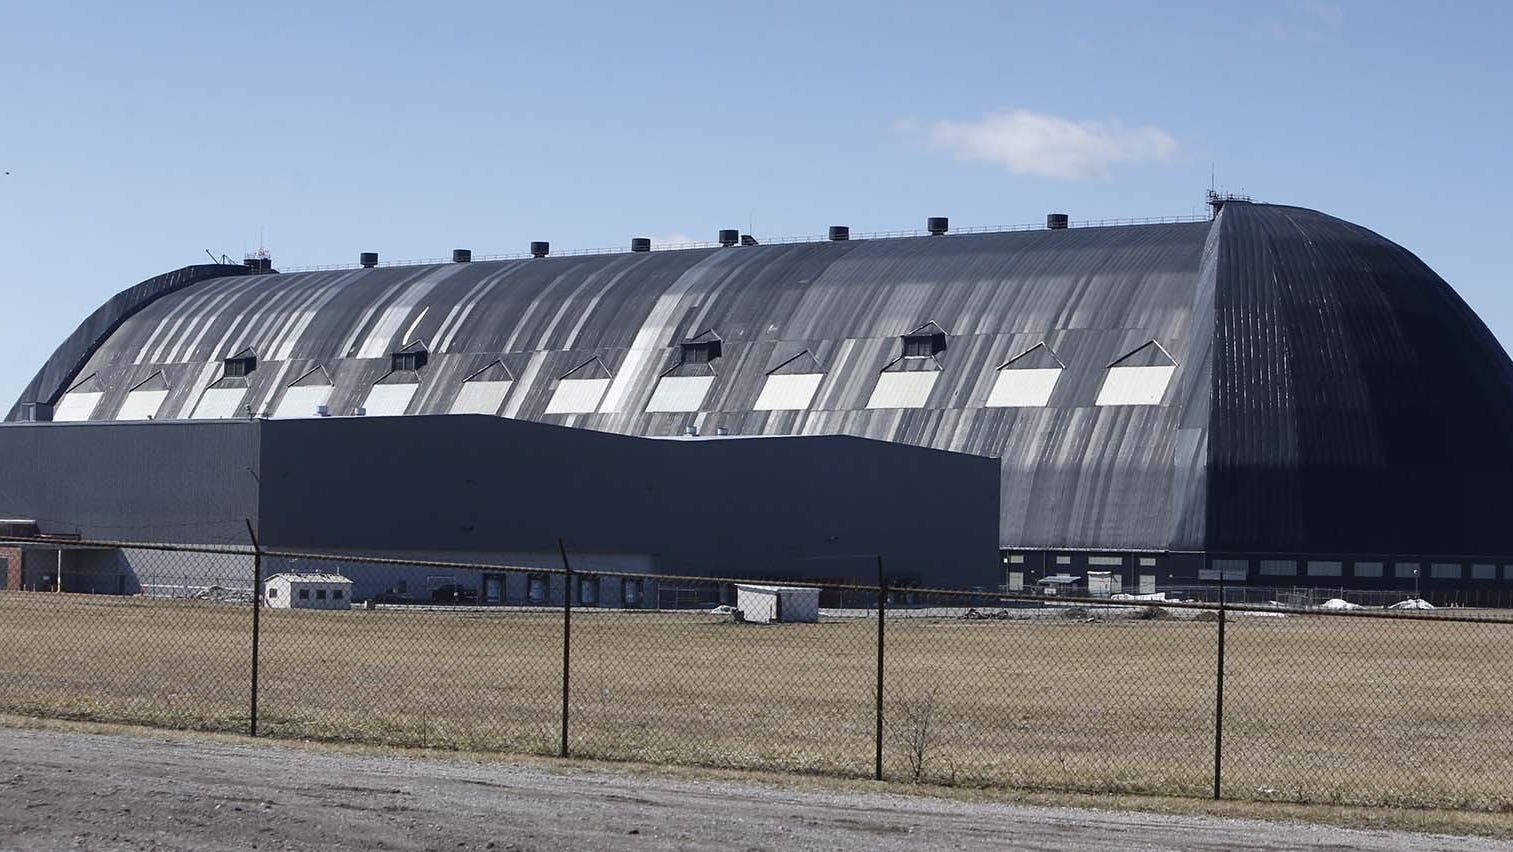 Akron Airdock will be used to build LTA stateofart airships